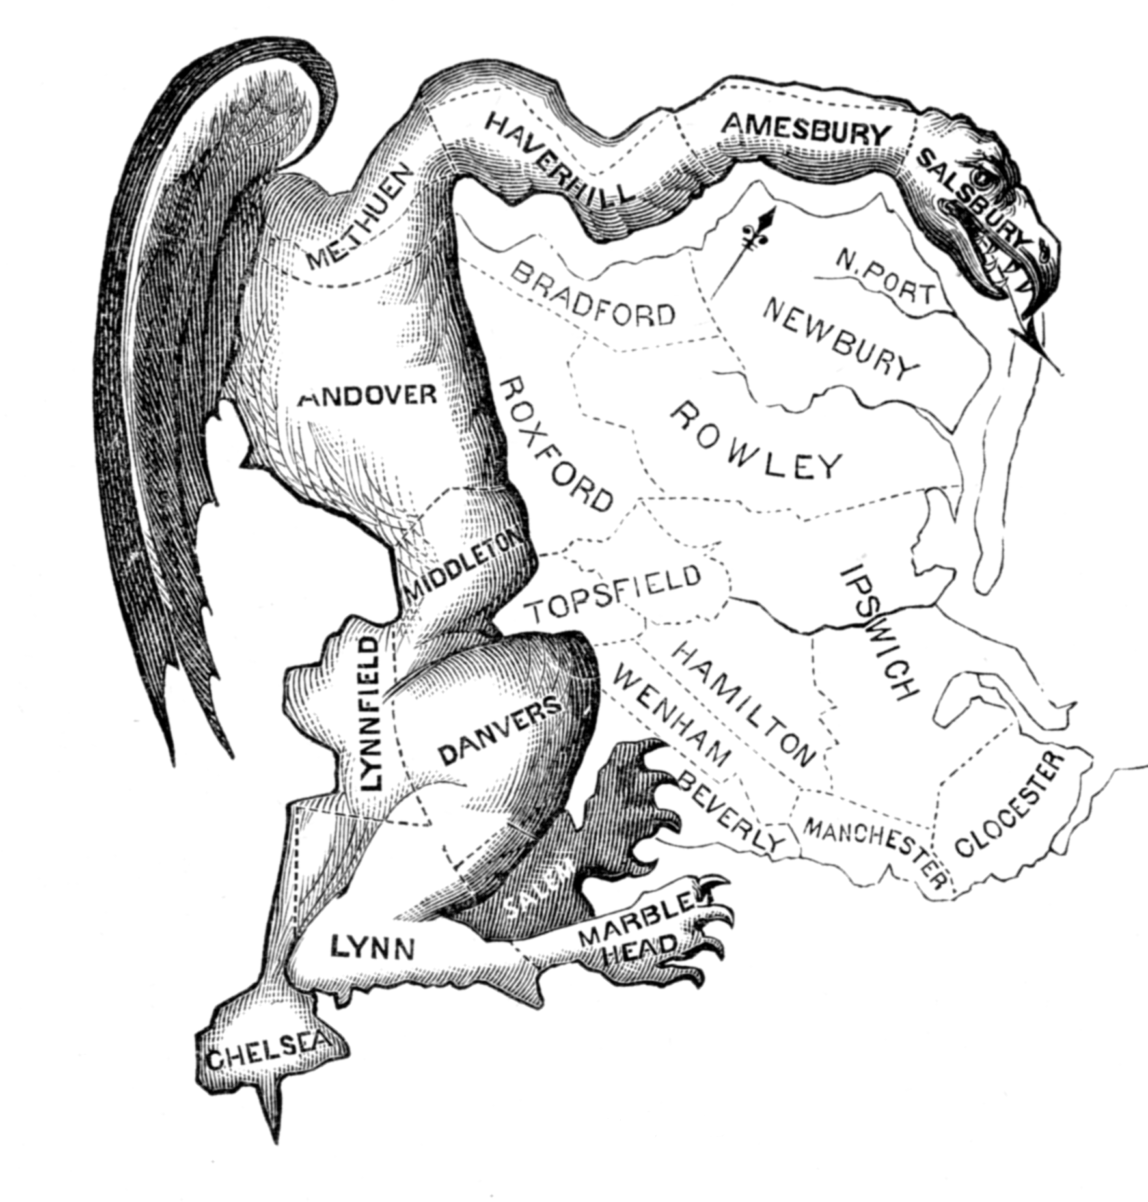 Printed in March 1812, this political cartoon was drawn in reaction to the newly drawn state senate election district of South Essex created by the Massachusetts legislature to favor the Democratic-Republican Party candidates of Governor Elbridge Gerry over the Federalists.